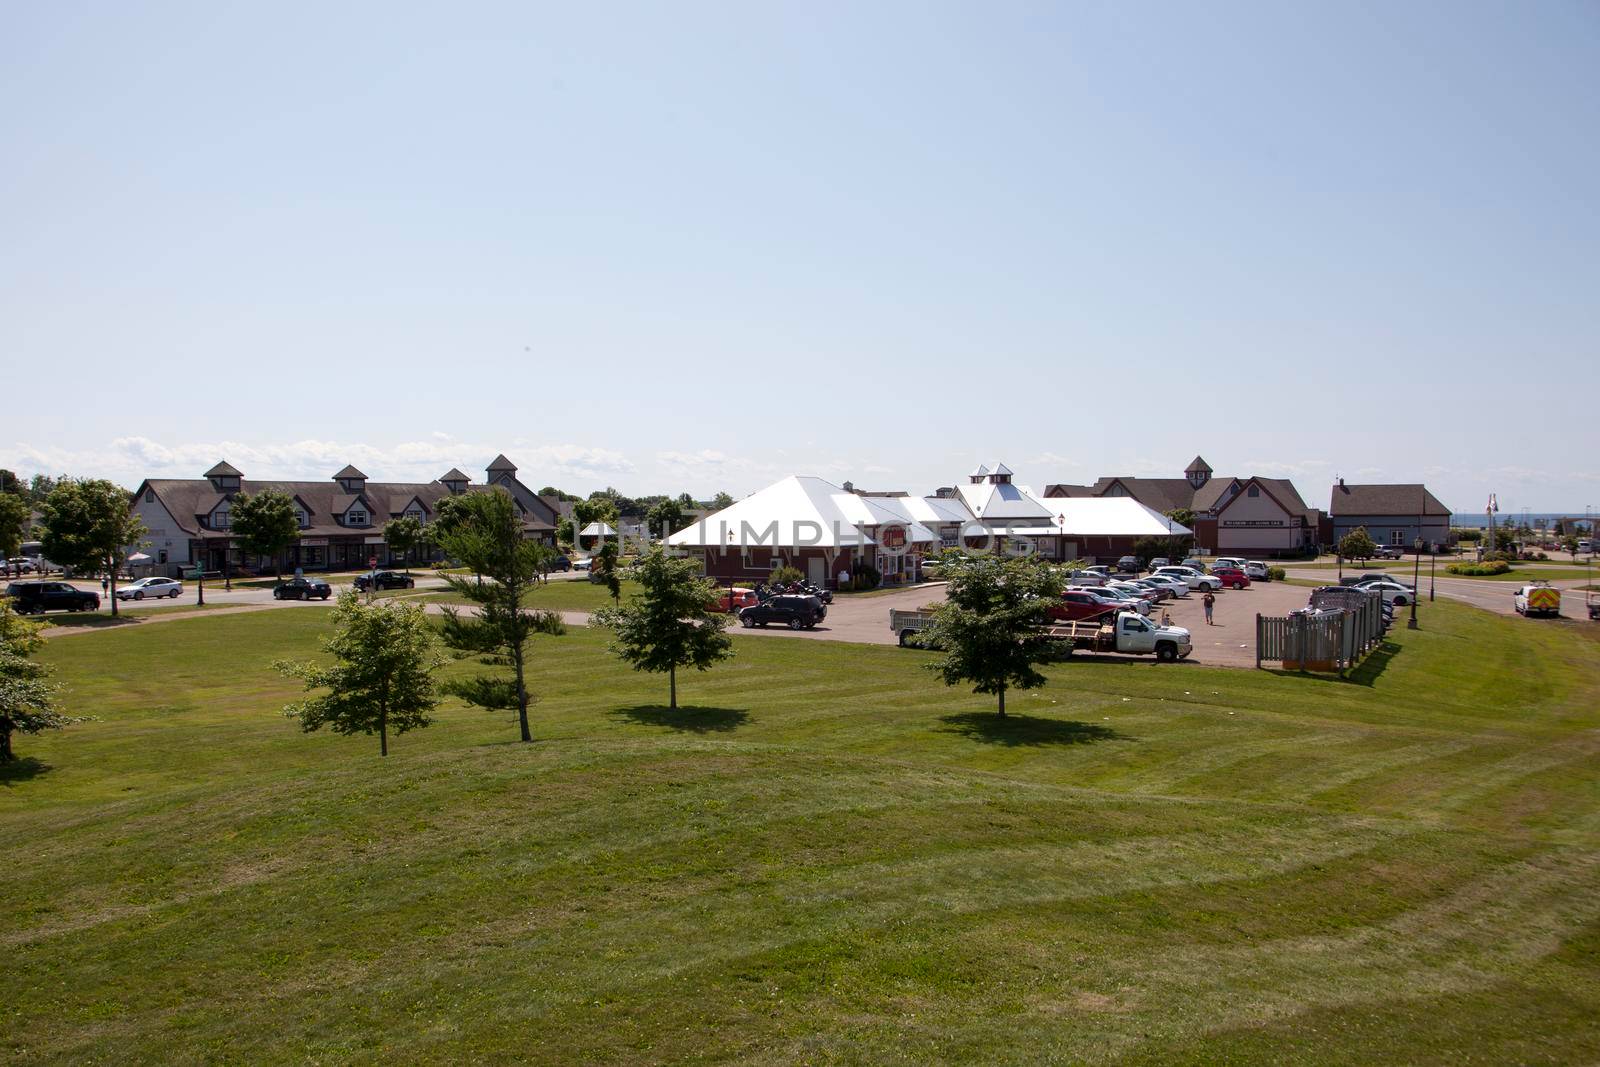 July 26, 2019: Borden Carleton, PEI: Shops and stores at the Gateway Village in PEI beside the confederation bridge